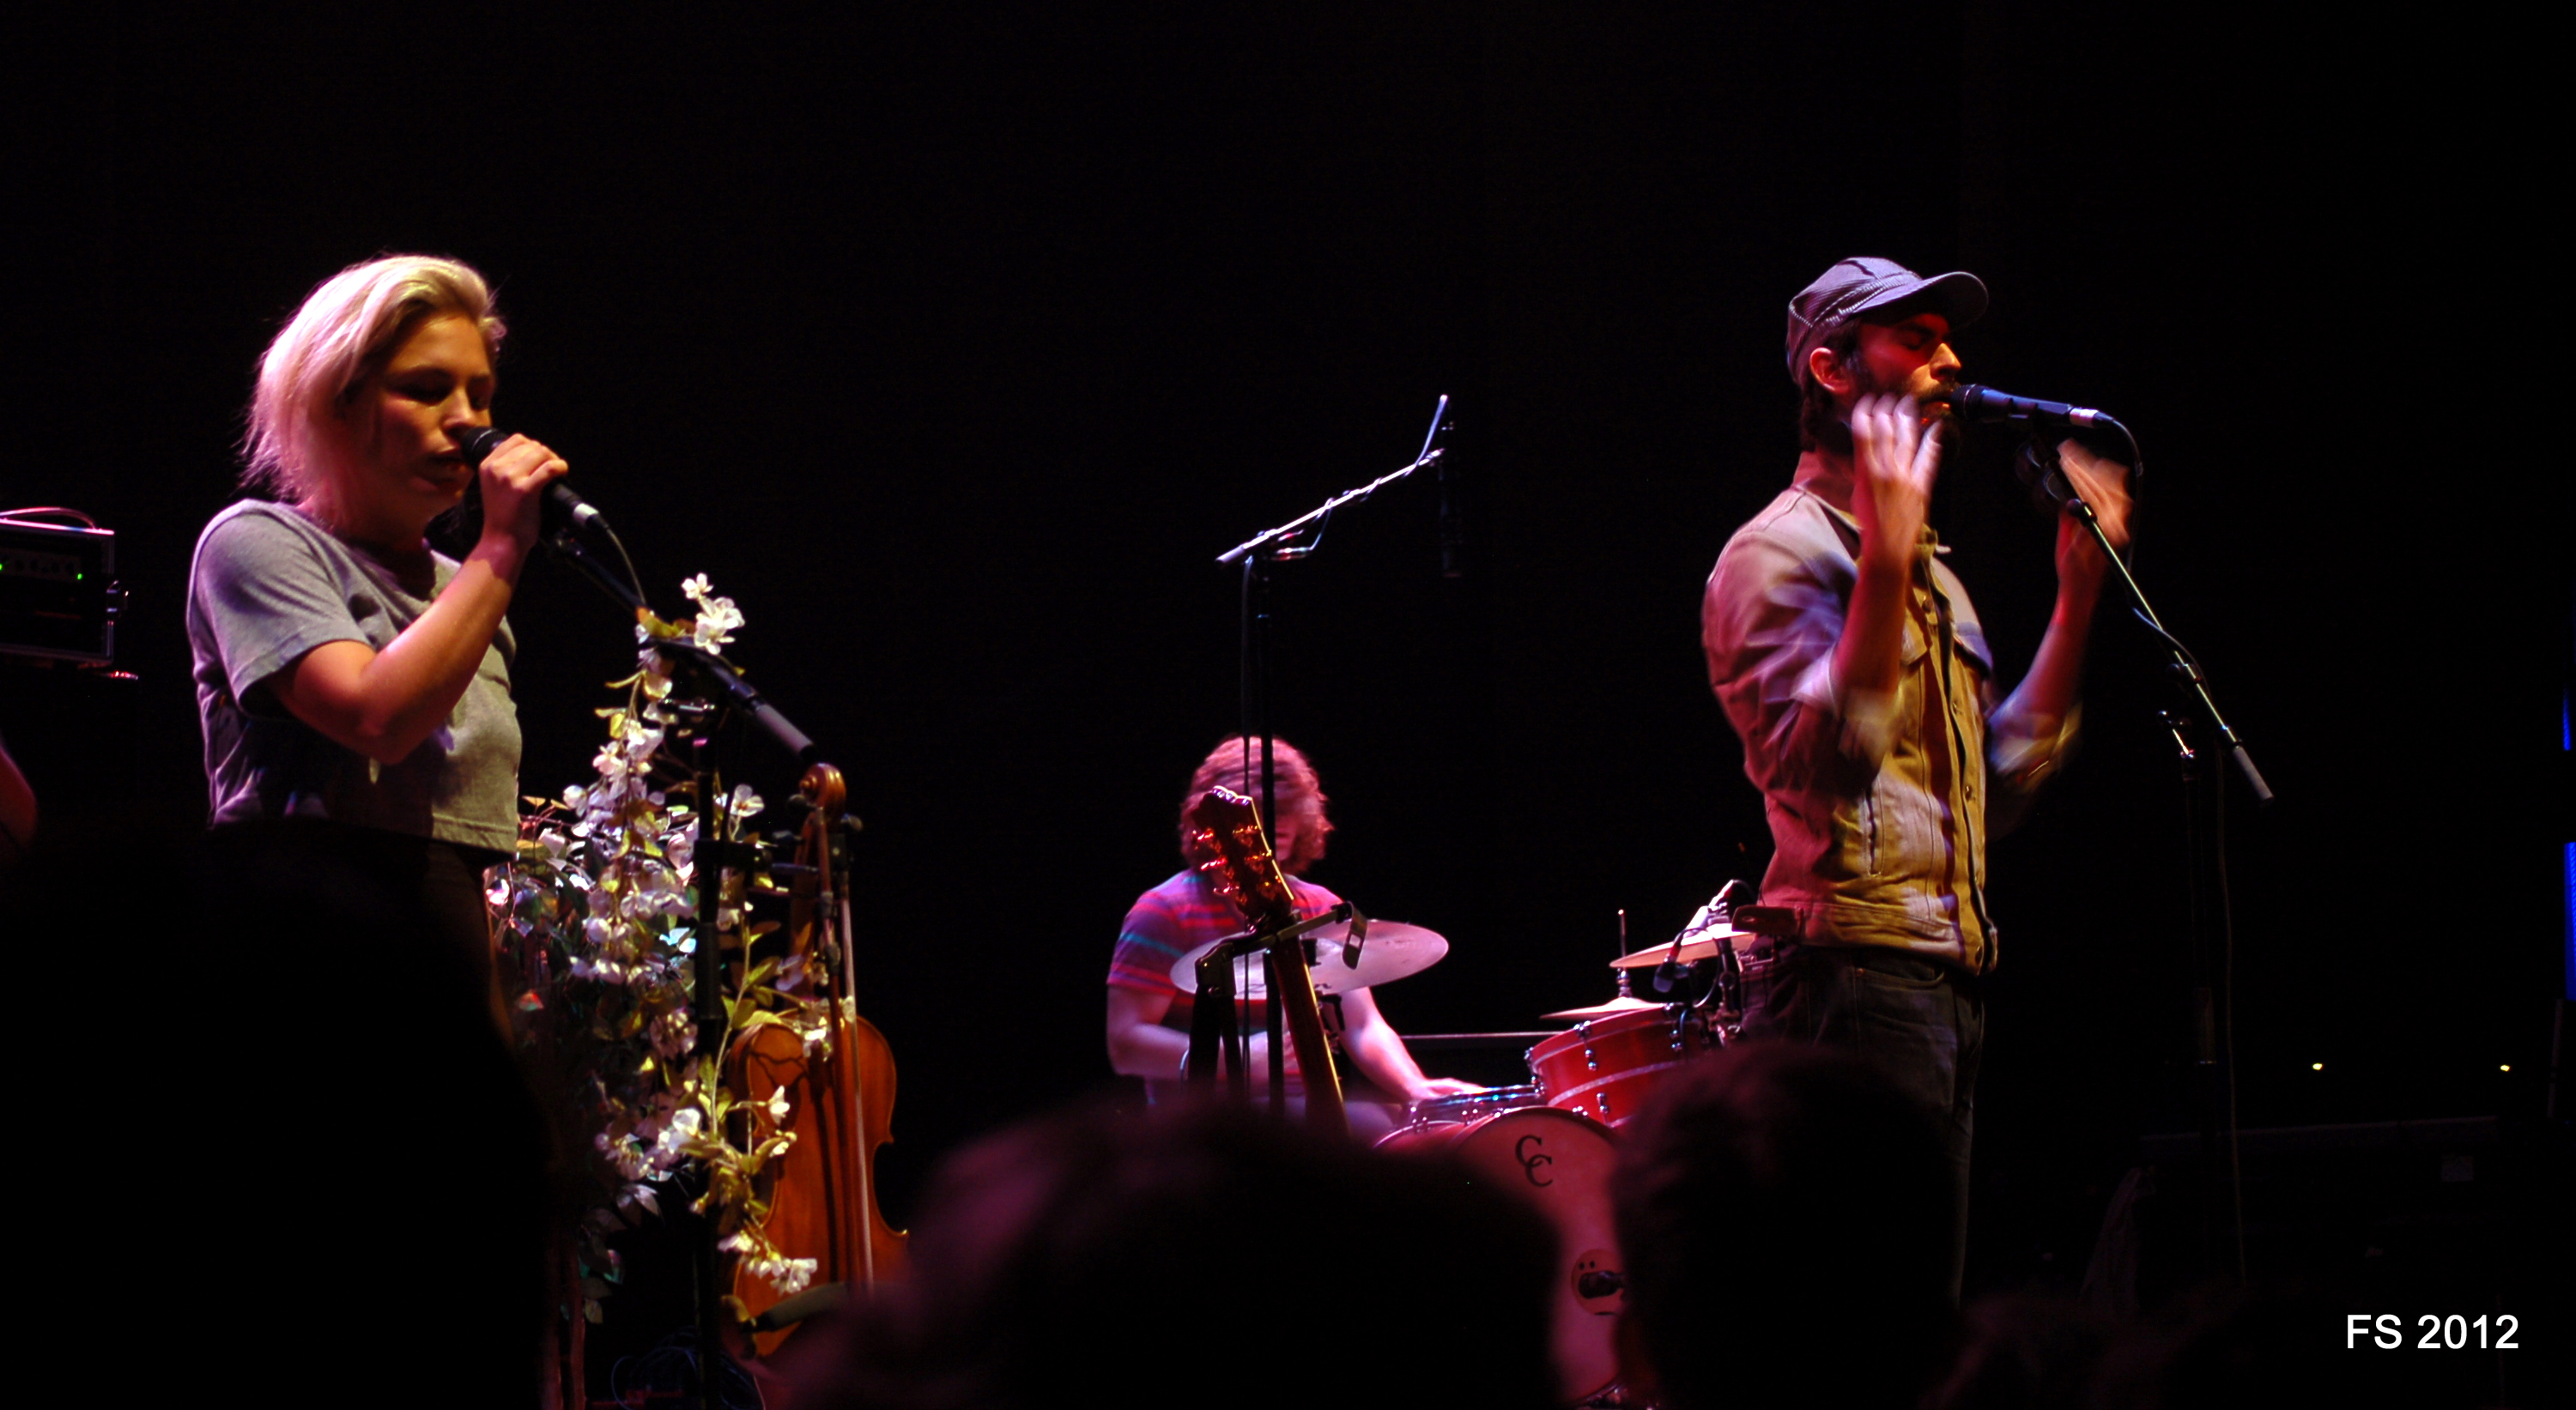 Photos: The Head & The Heart, Blitzen Trapper and Bryan John Appleby, September, 28th 2012 @ Capitol Theater